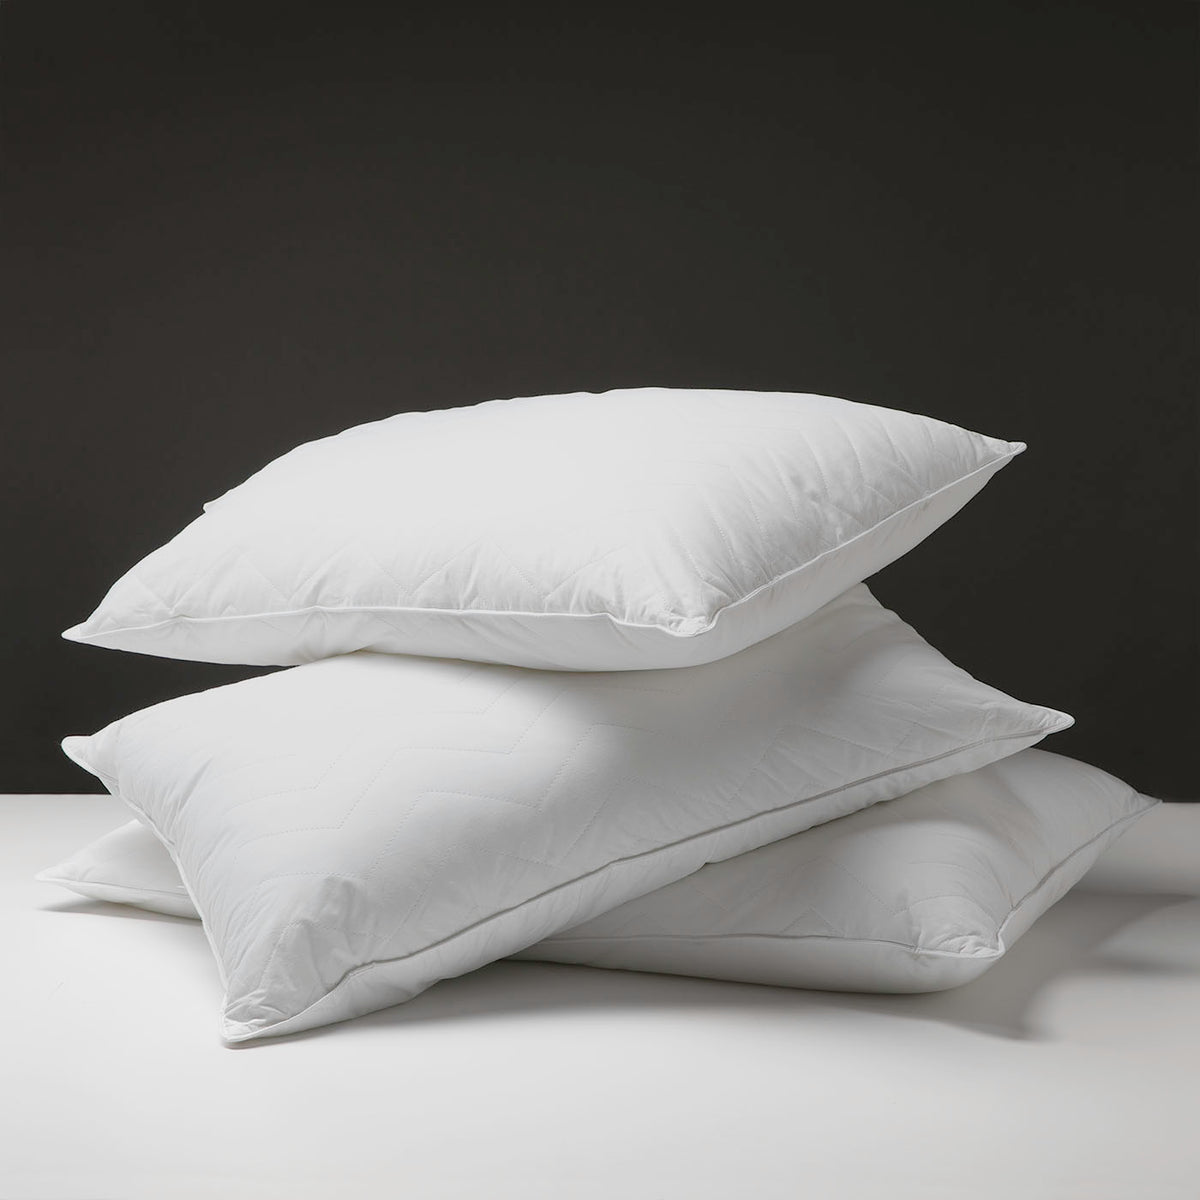 Westin Heavenly Soft Support Polyester Bed Pillow | Made in USA-Queen- from